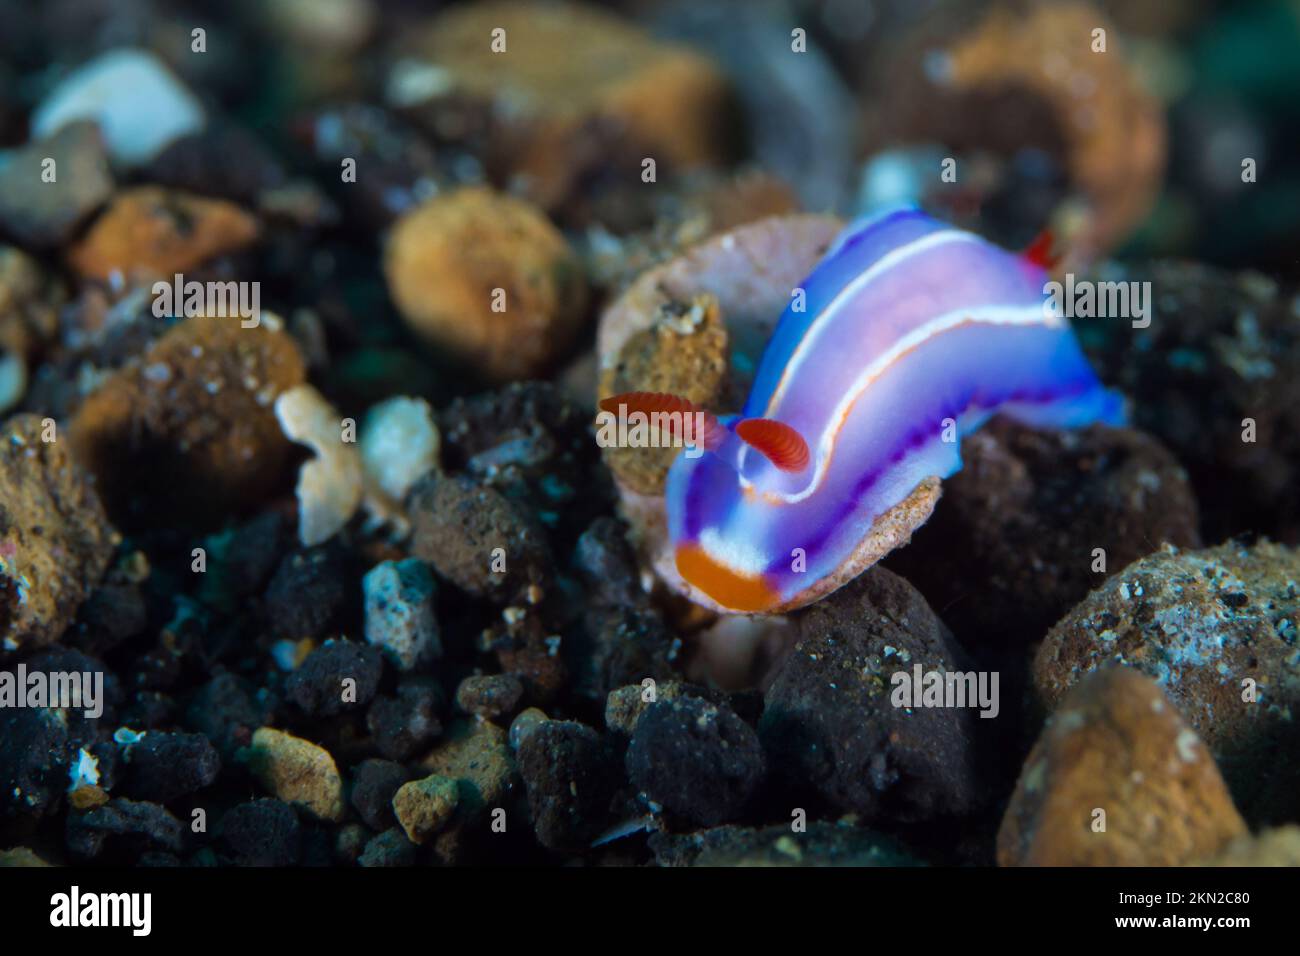 Colorful nudibranch sea slug crawling above coral reef in the Indo Pacific Stock Photo